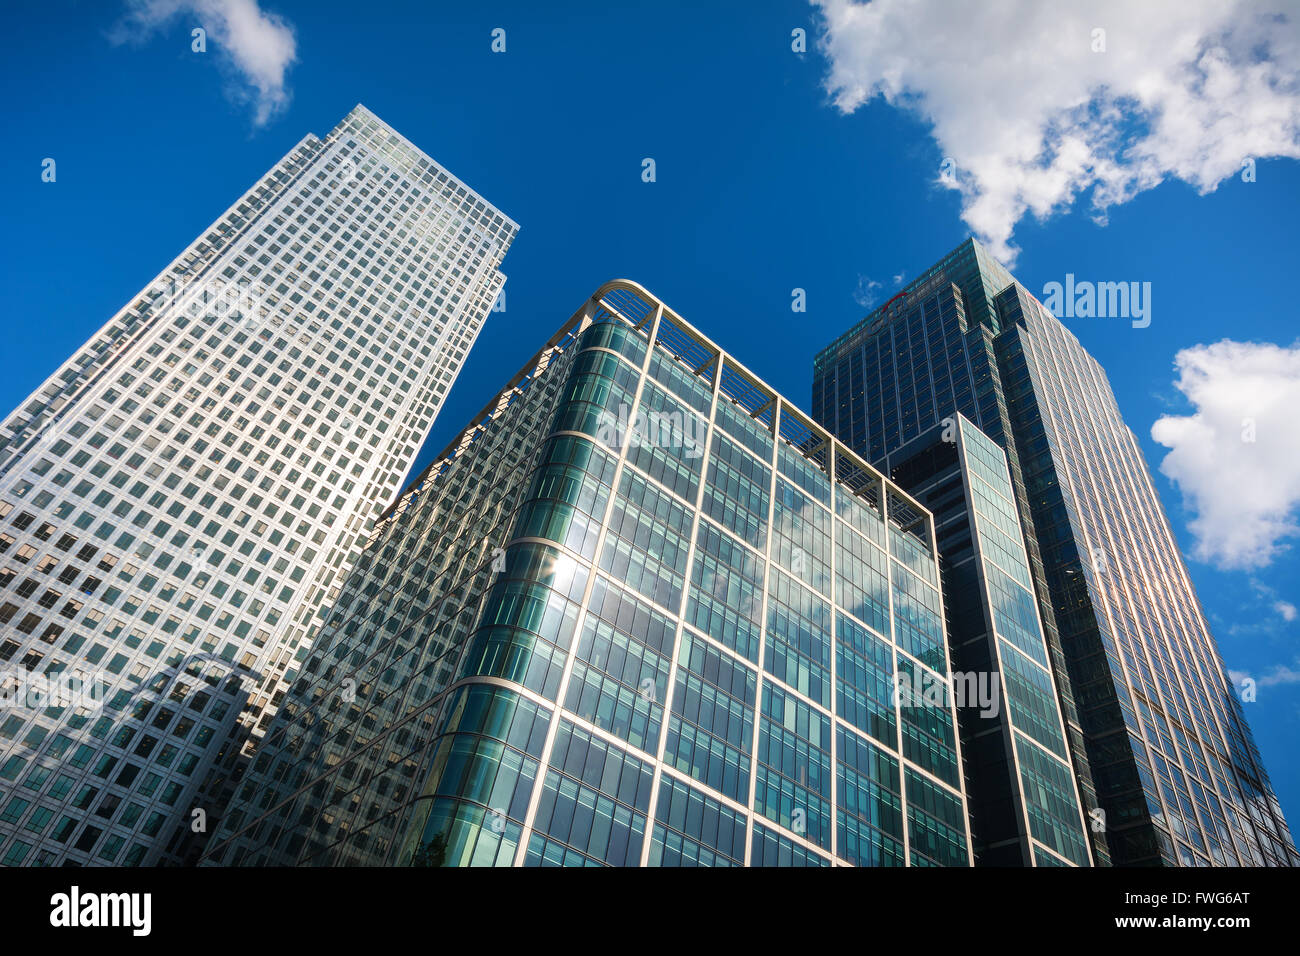 Skyscrapers at Canary Wharf, Docklands the heart of the financial district of London Stock Photo